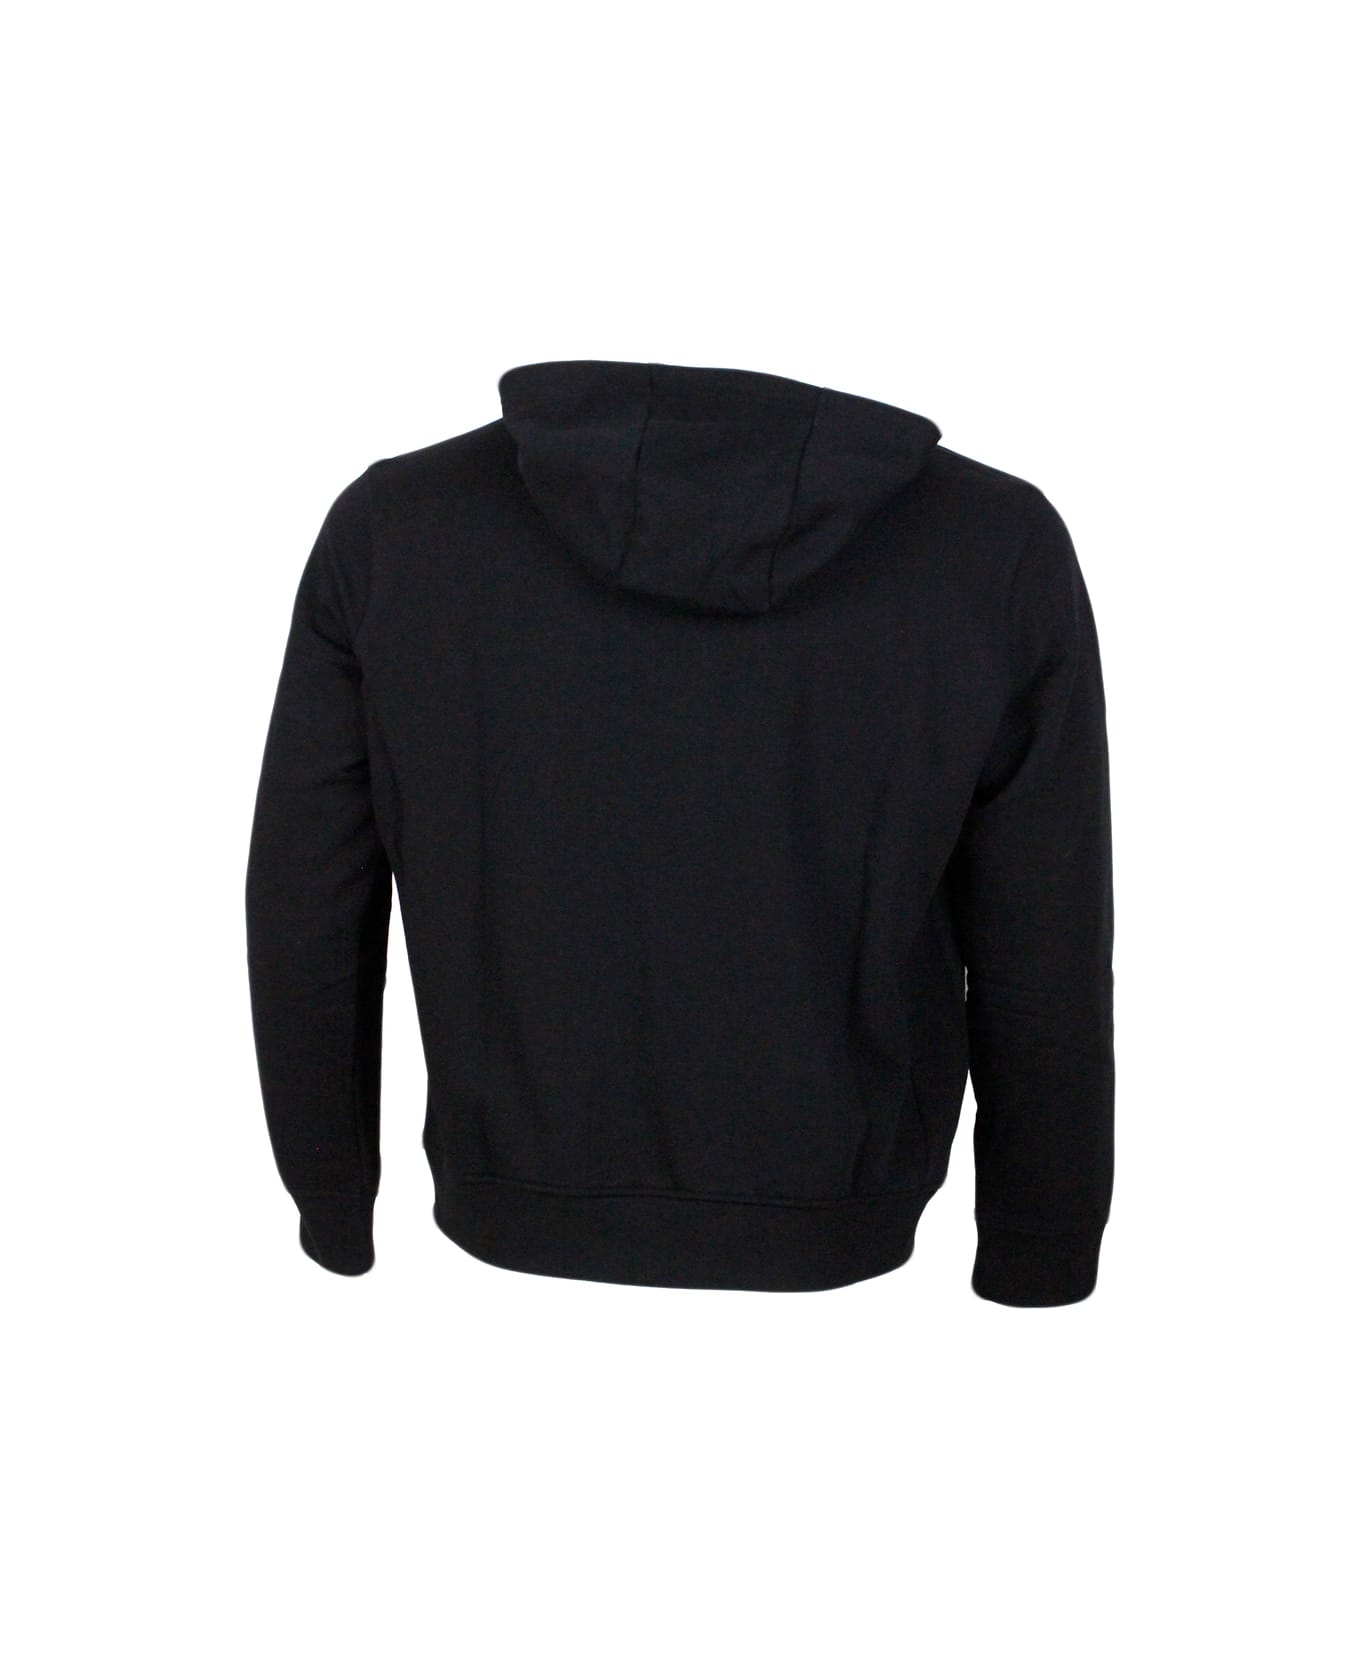 Armani Collezioni Long-sleeved Full Zip Drawstring Hoodie With Small Logo On The Chest - Black ニットウェア